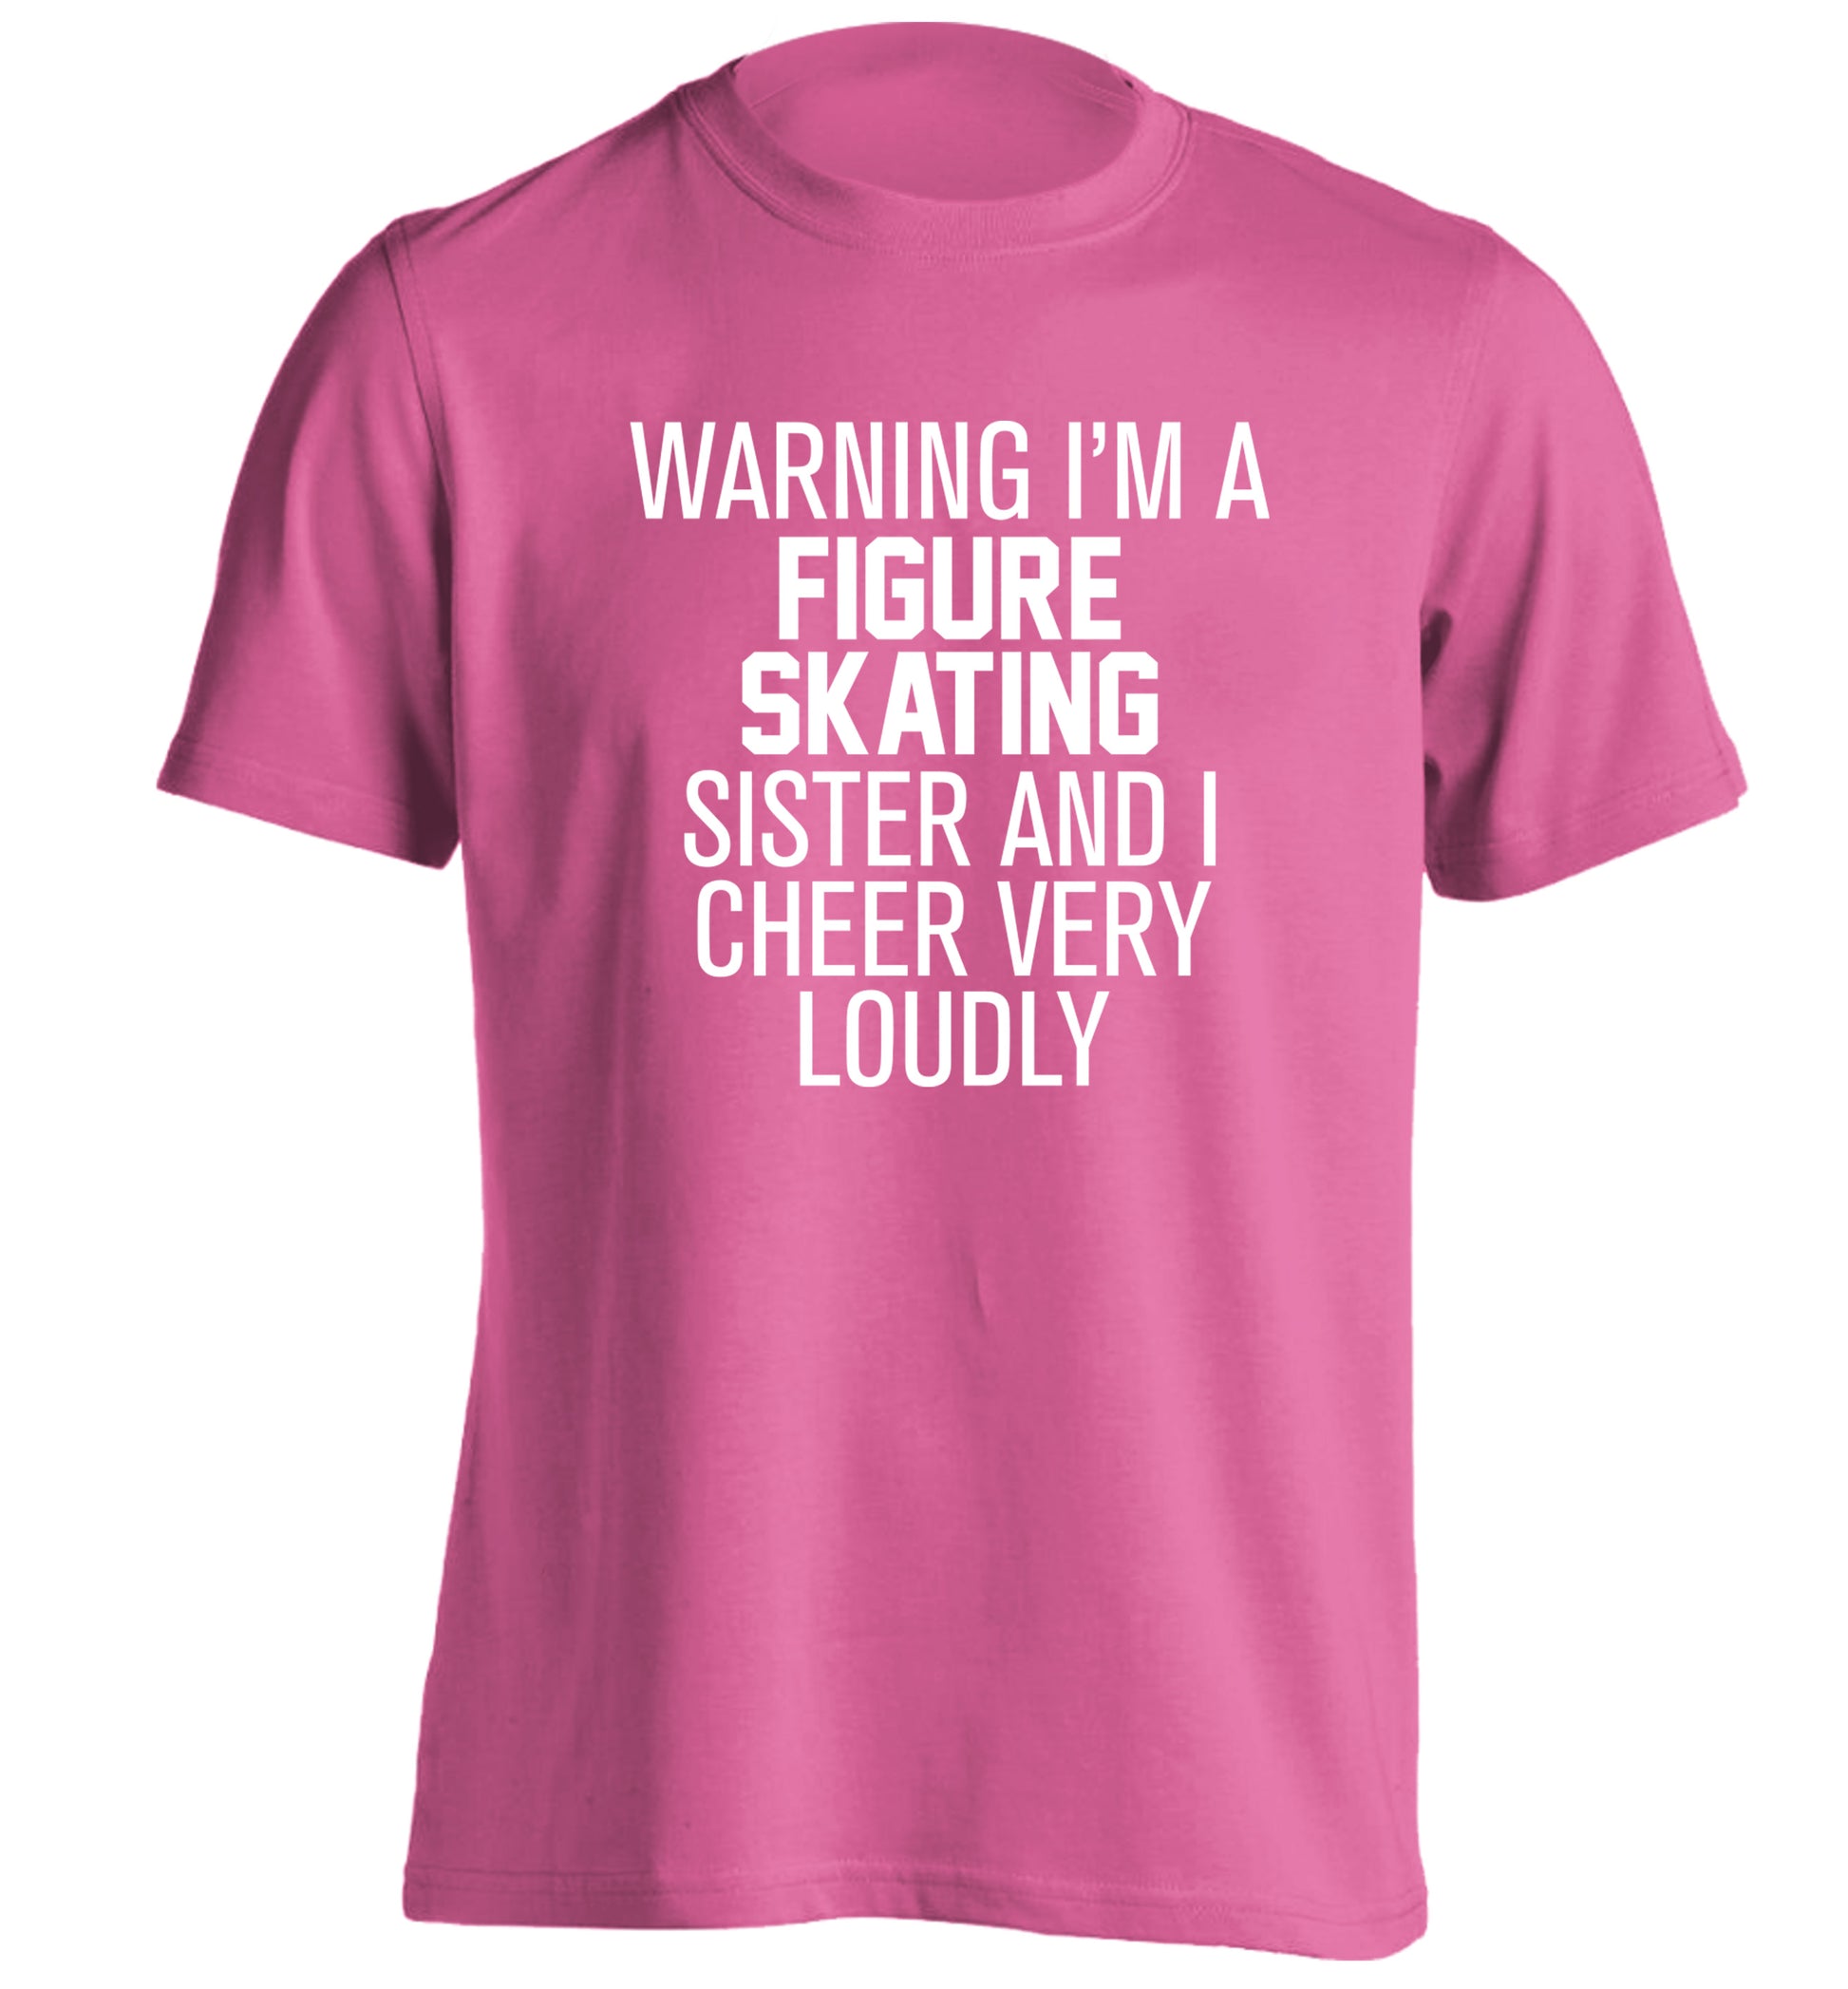 Warning I'm a figure skating sister and I cheer very loudly adults unisexpink Tshirt 2XL